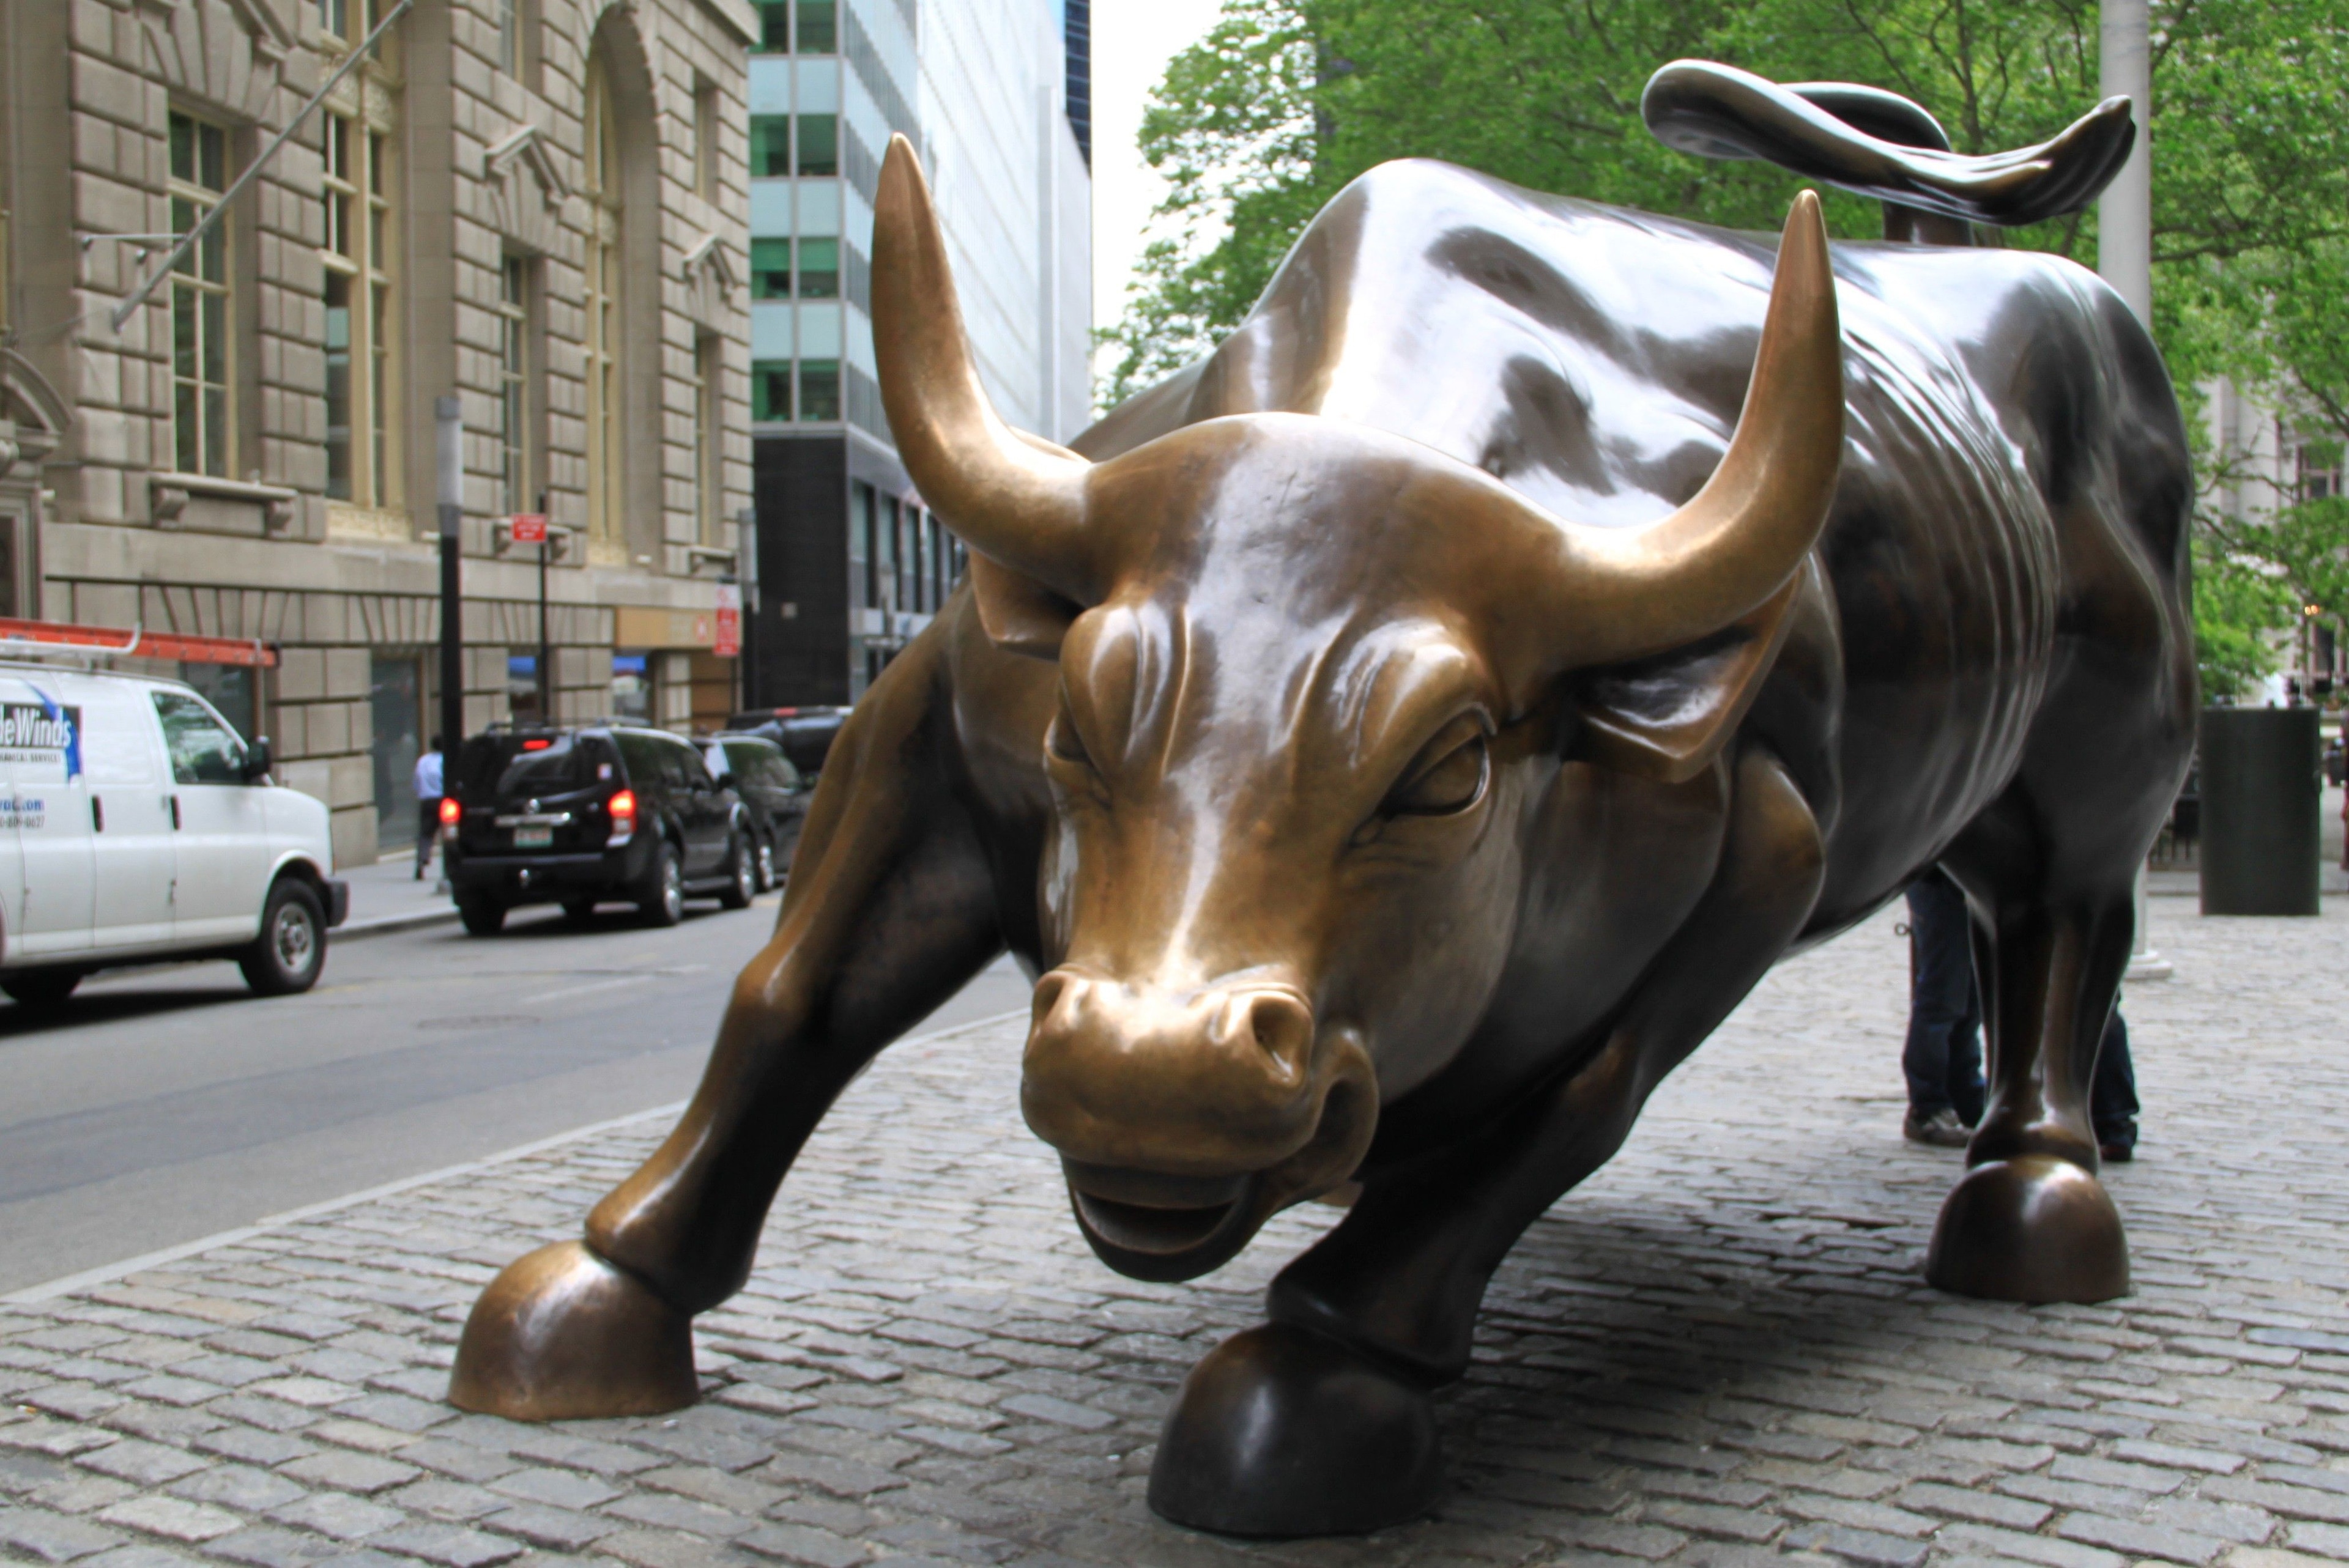 Image shows the famous bronze statue of a charging bull on Broadway in New York's financial district.